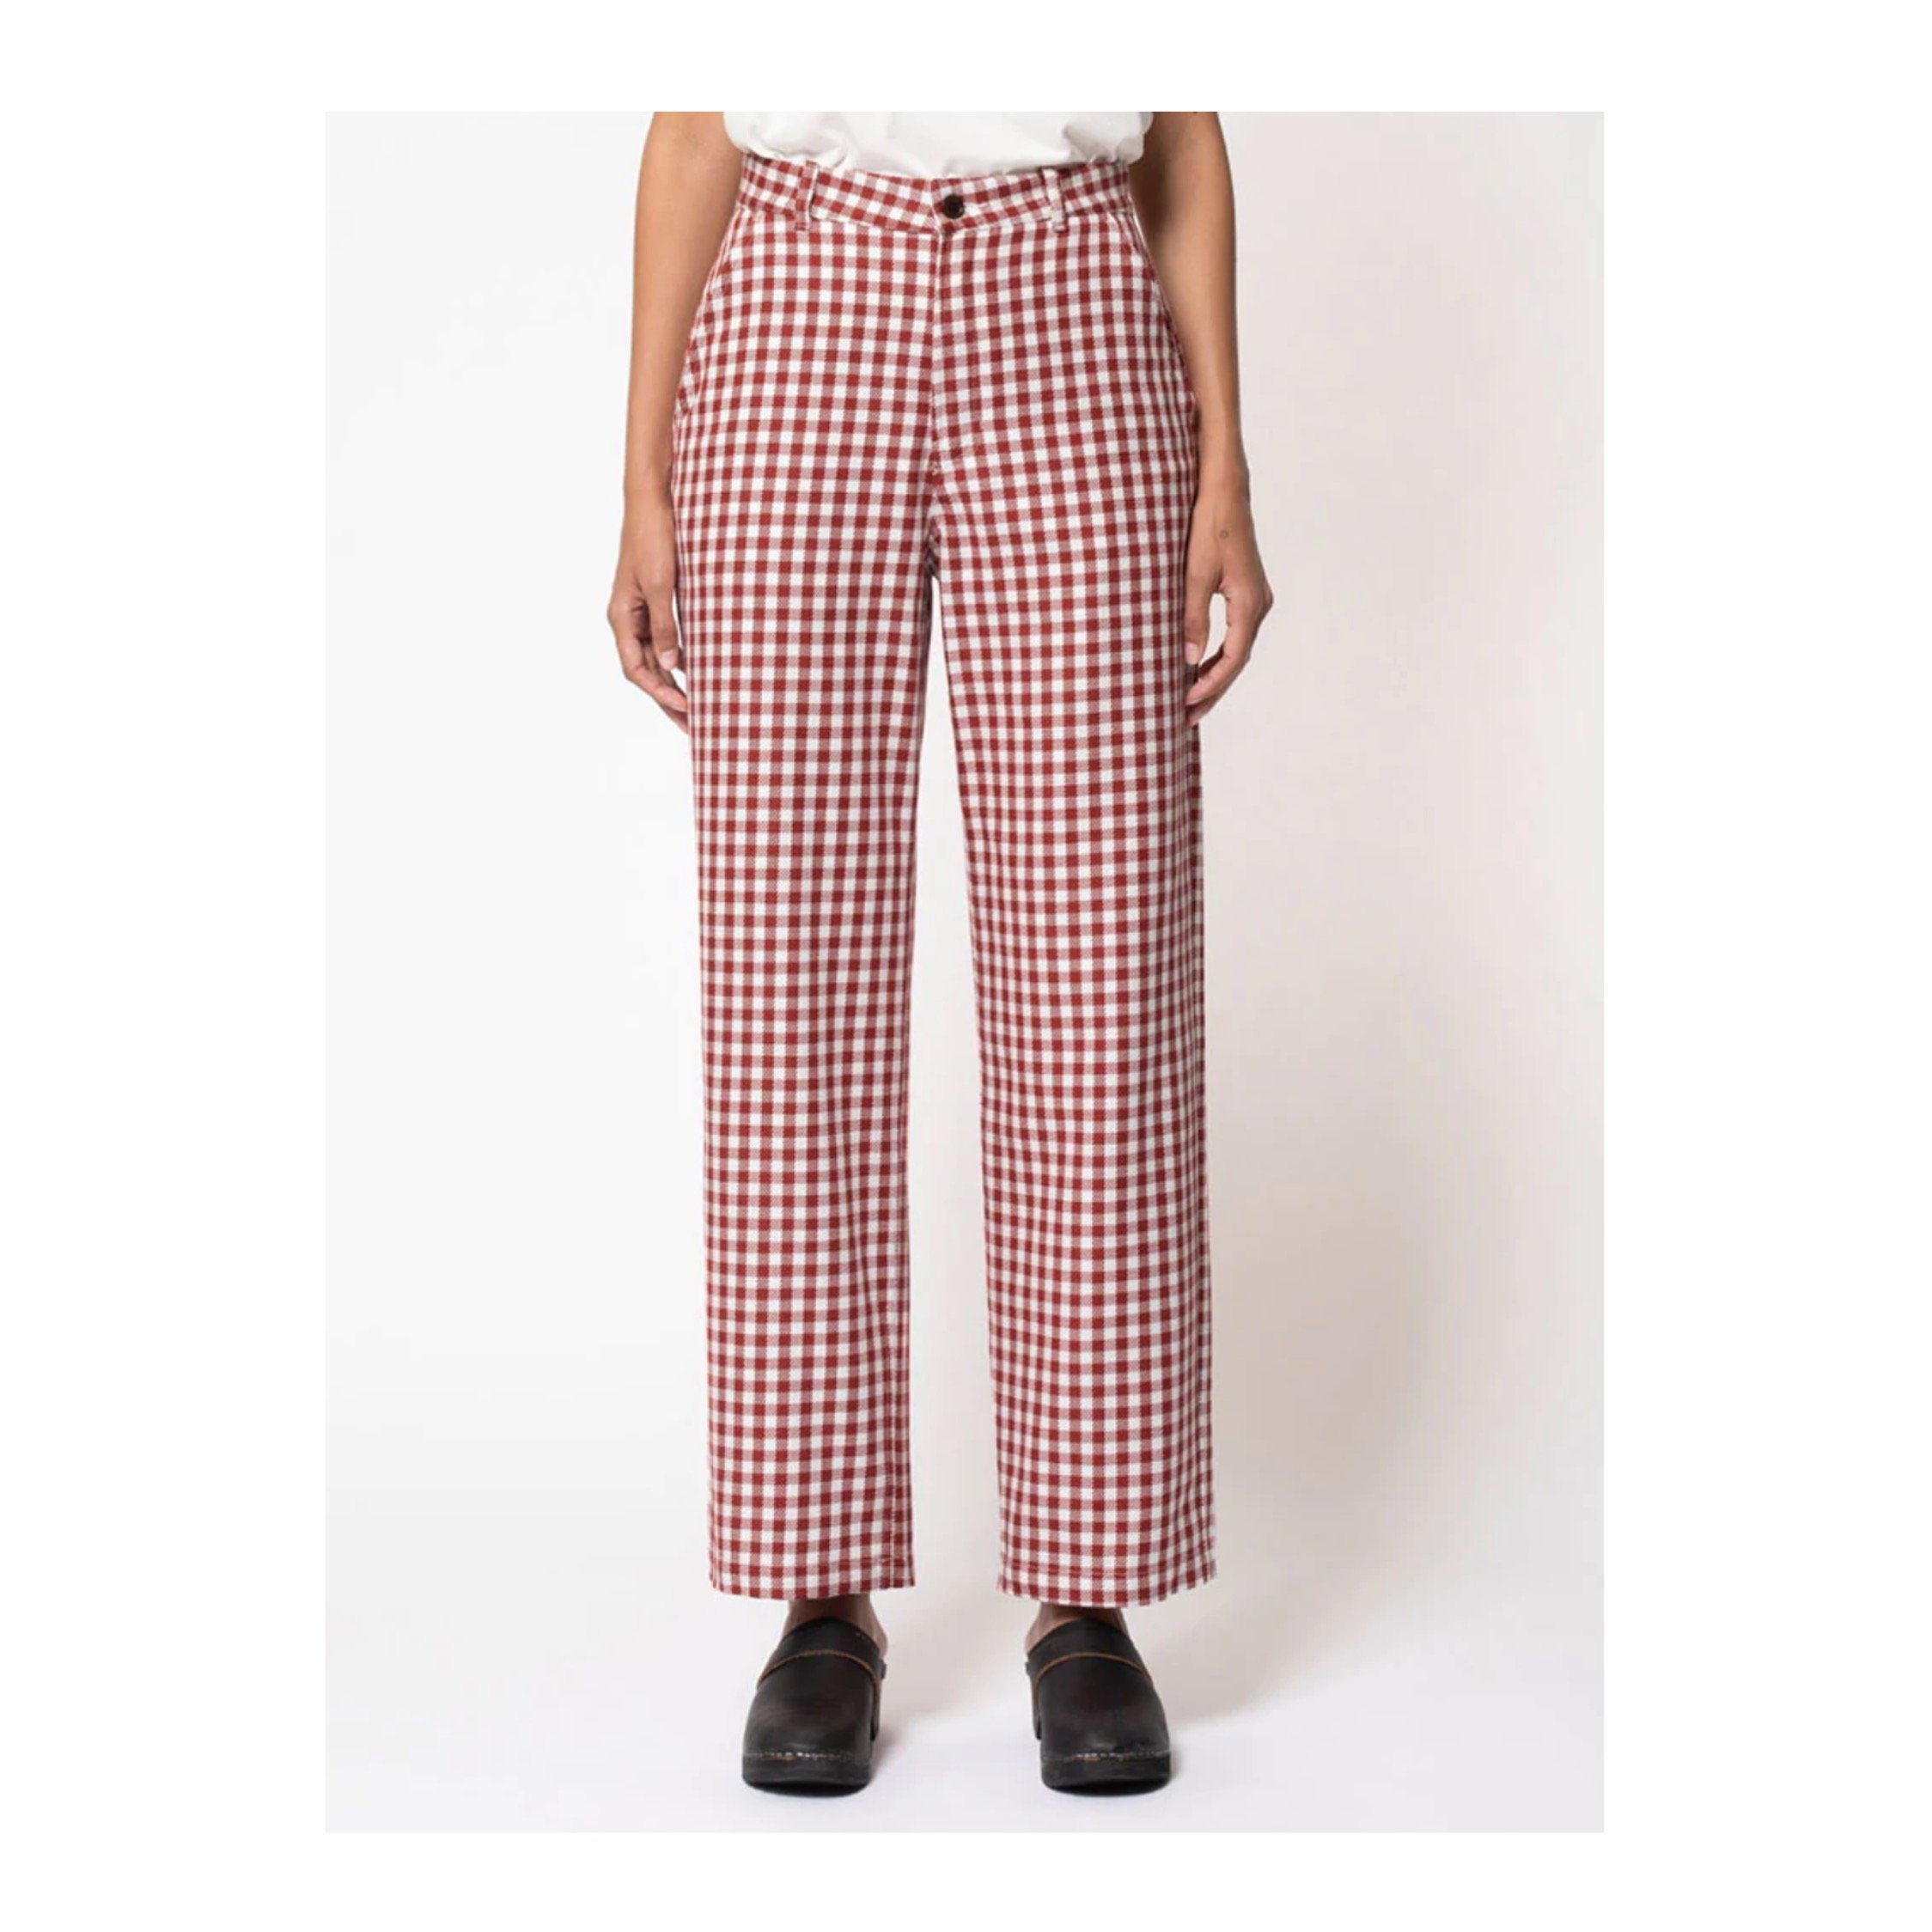 Checked pants by Nudie Jeans - £200